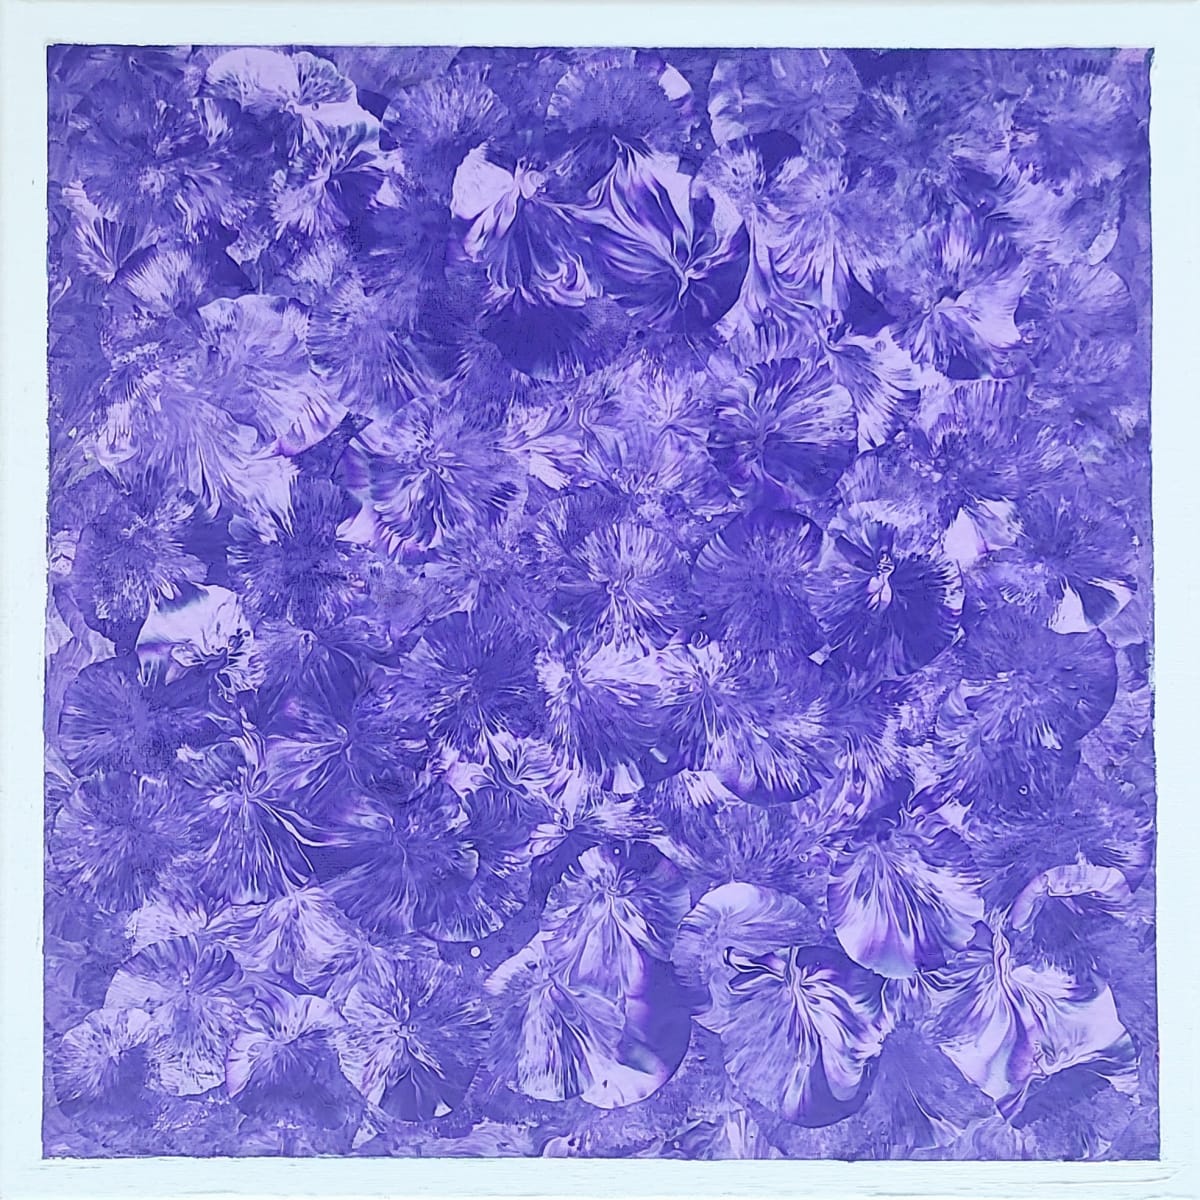 14 x 14 Purple Lavendar White - White Border is about 5-8 inch.jpg by Wilmington Art Gallery  Image: 14 x 14 Purple Lavendar White - White Border is about 5-8 inch.jpg